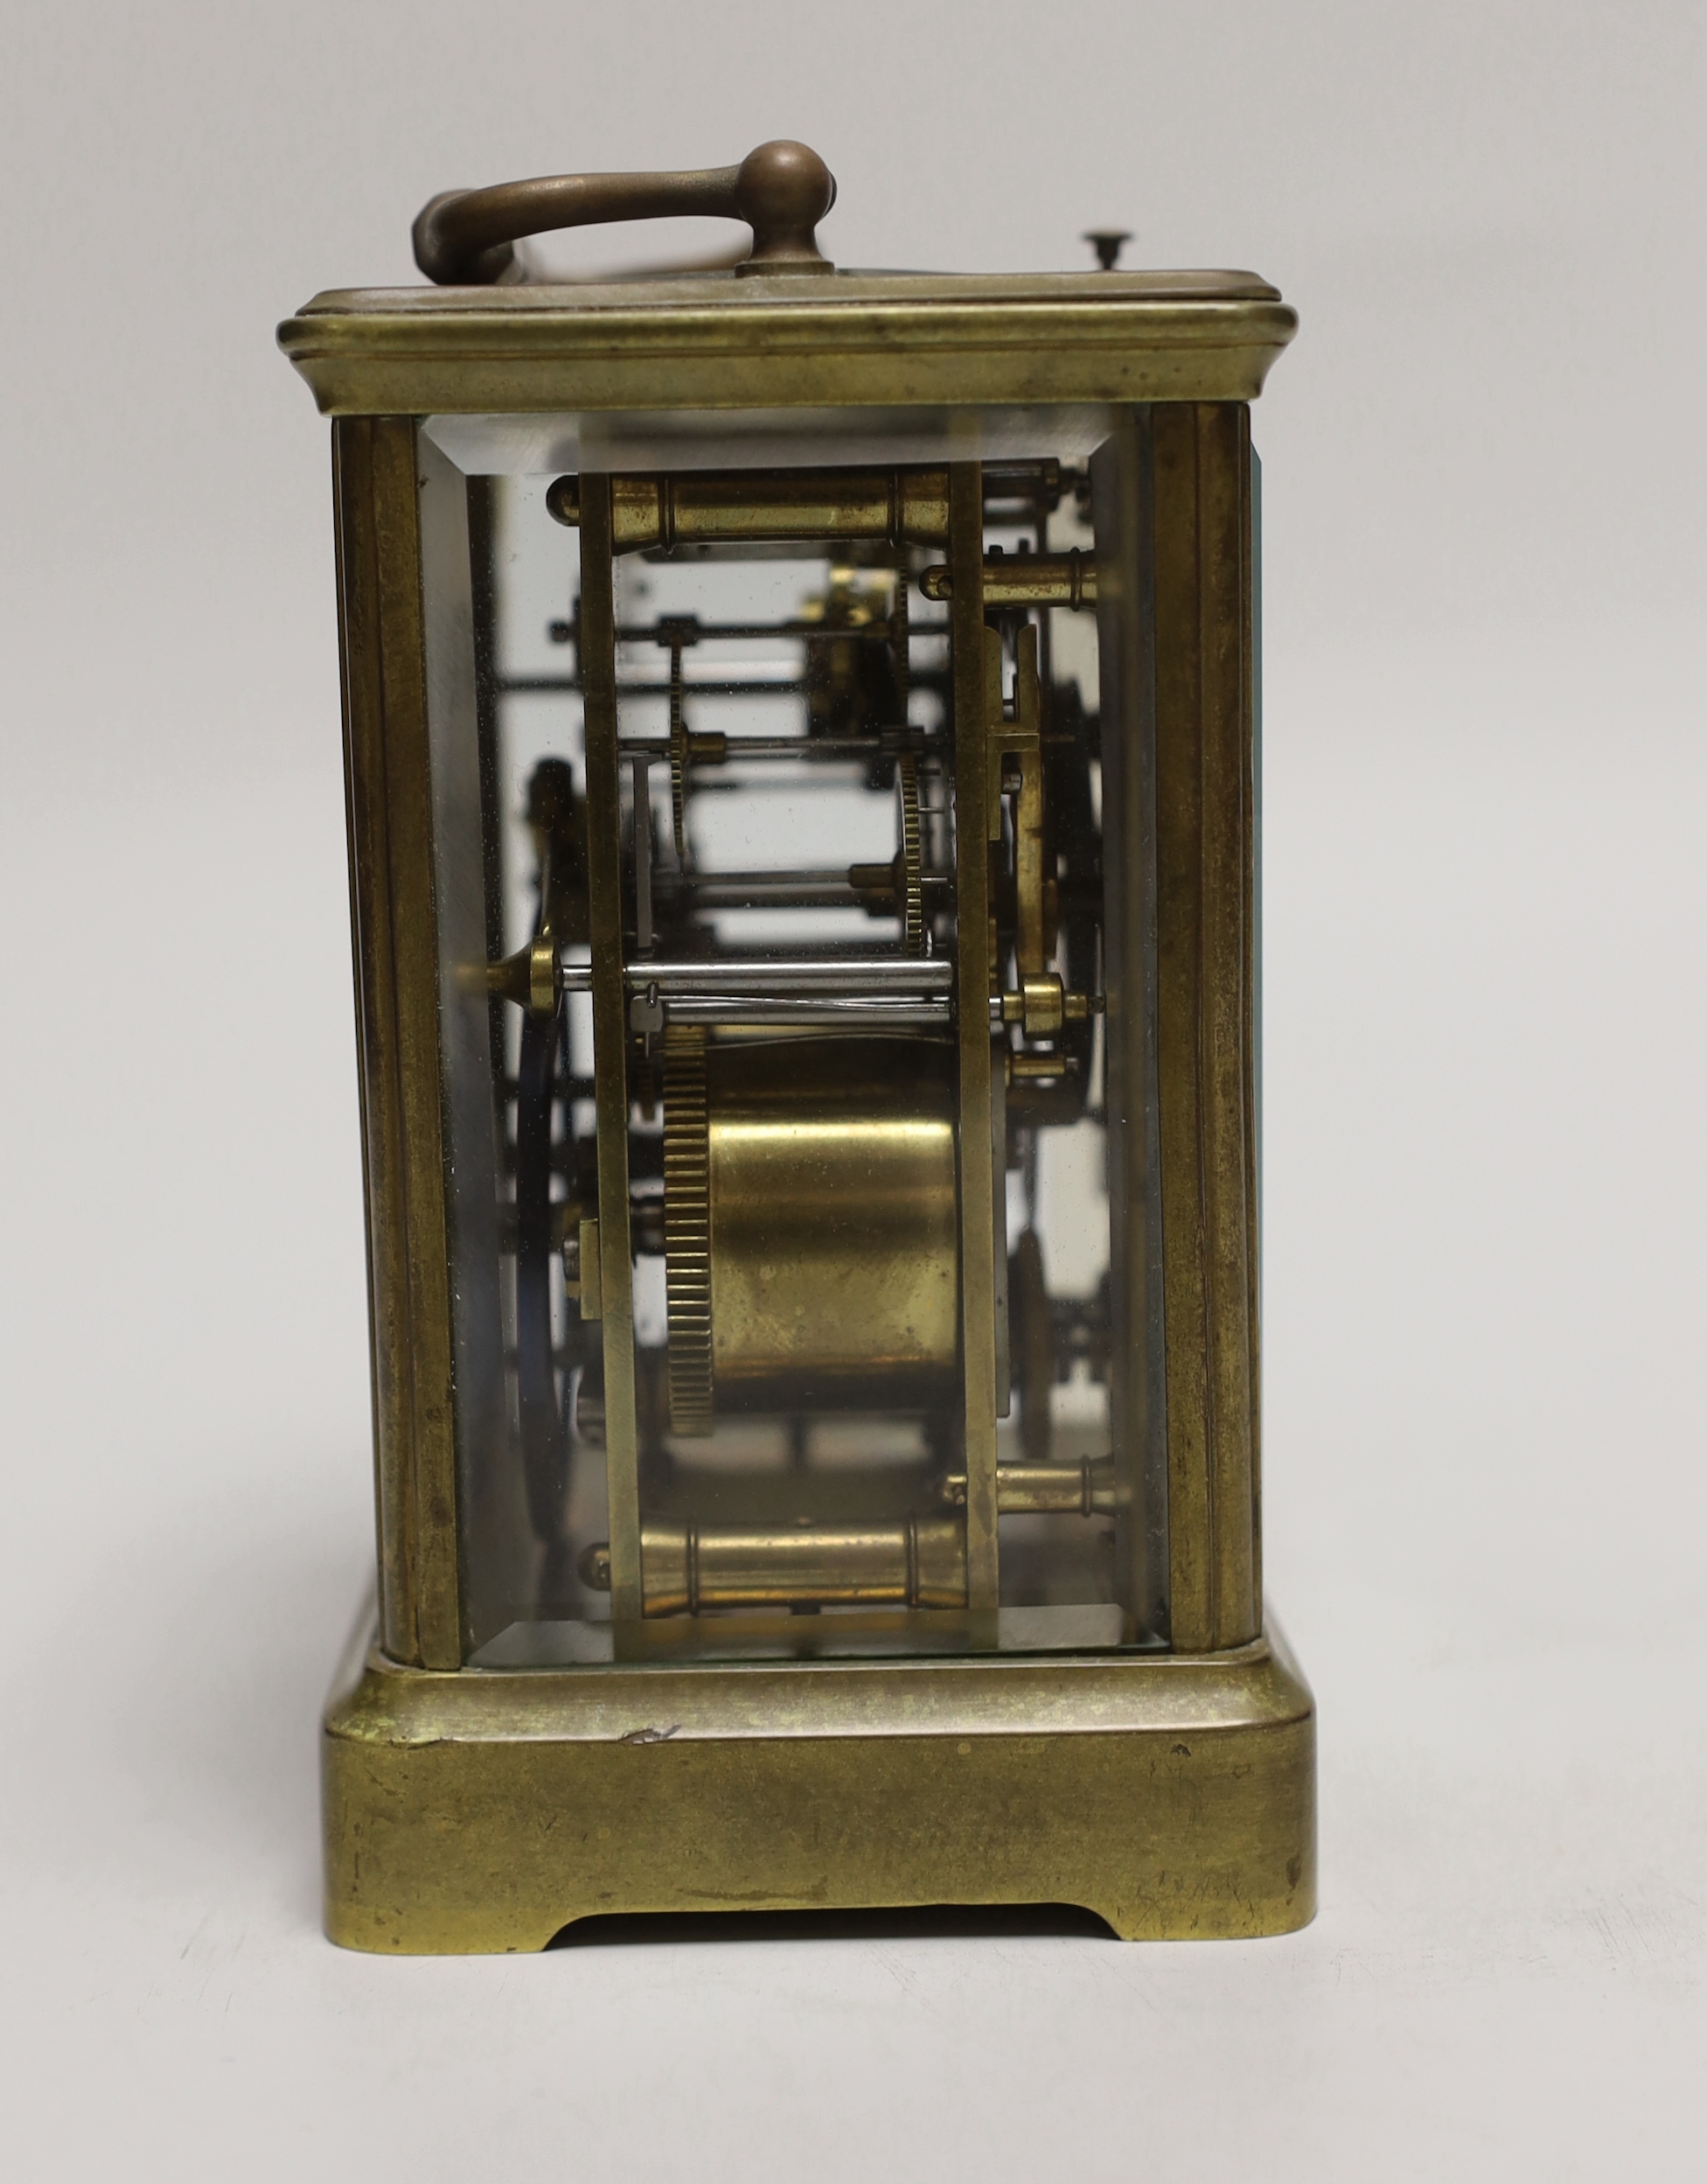 A repeating carriage clock with alarm dial, movement signed for Charles Vincenti, with retailer John Walker, 230 Regent Street London to enamel face, 13.5cm high